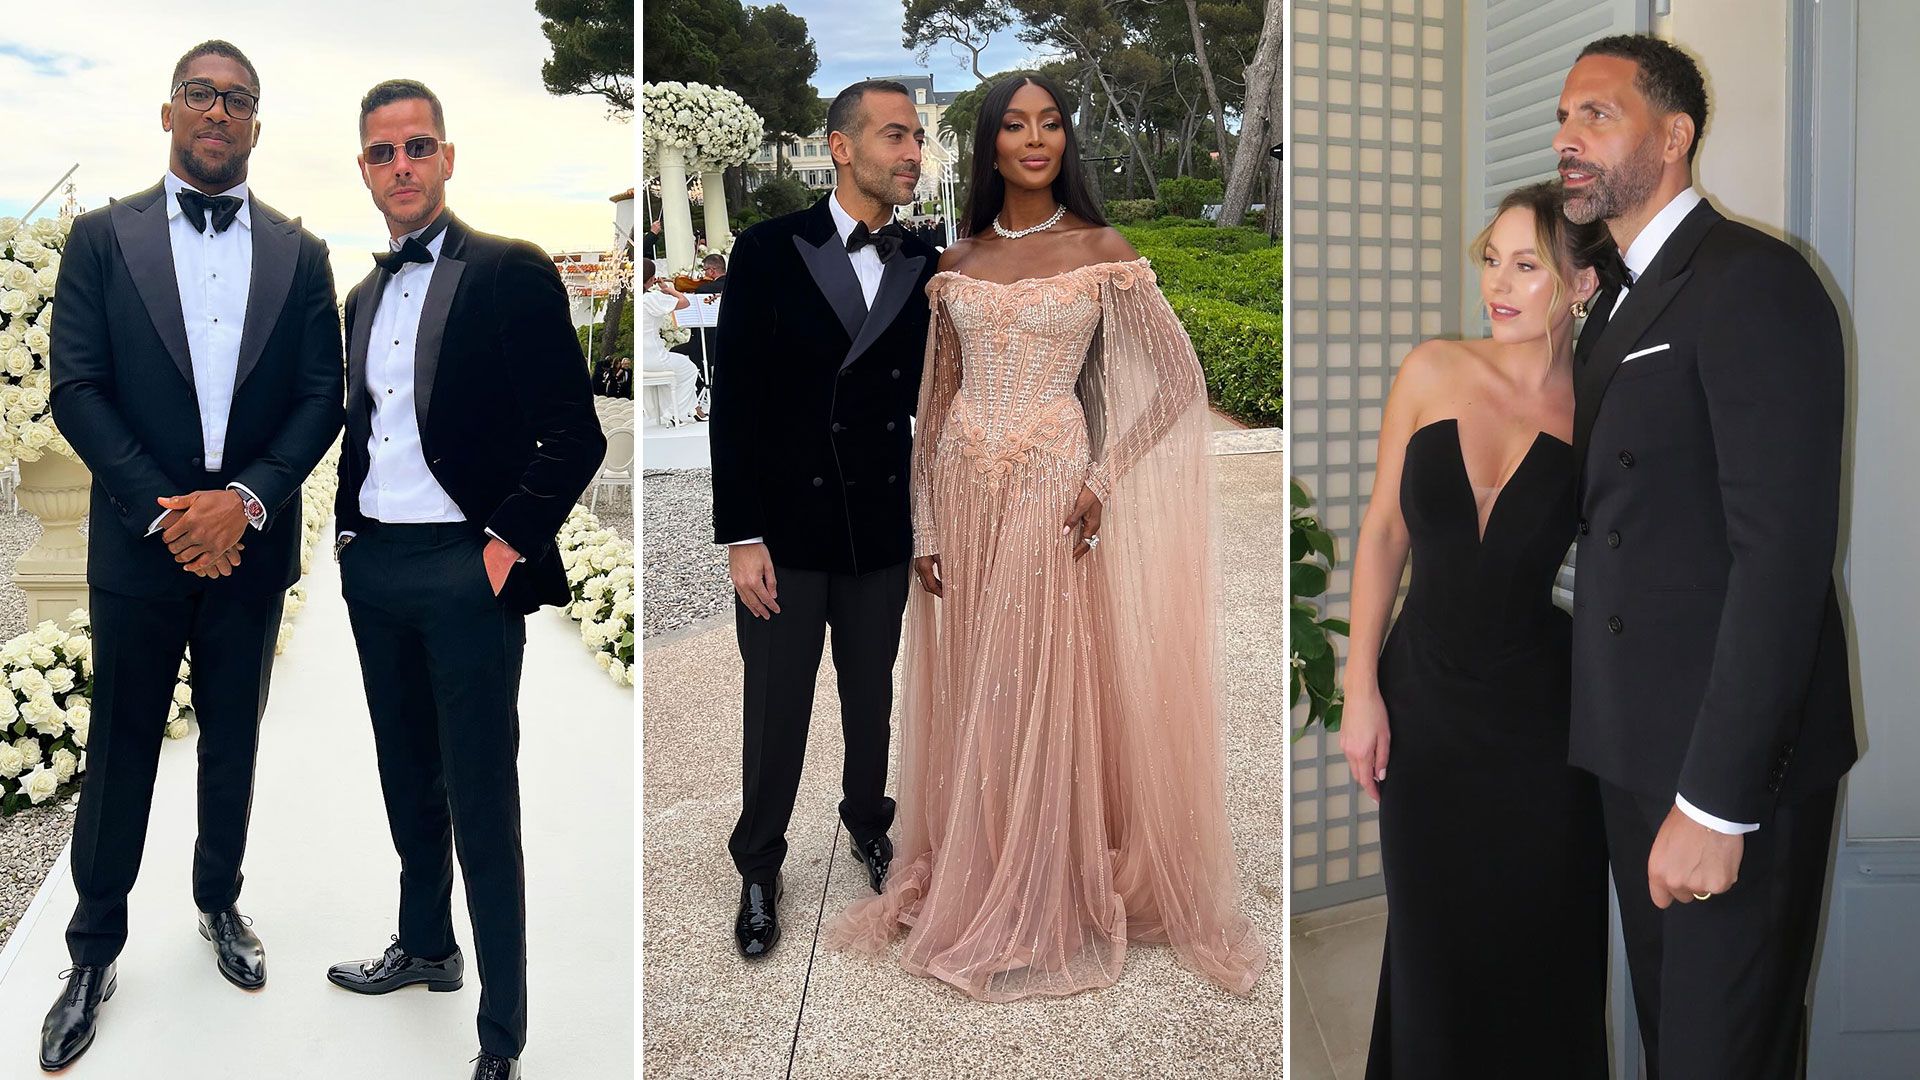 PrettyLittleThing's Umar Kamani's star-studded wedding guest list revealed: from Mariah Carey to Rio and Kate Ferdinand